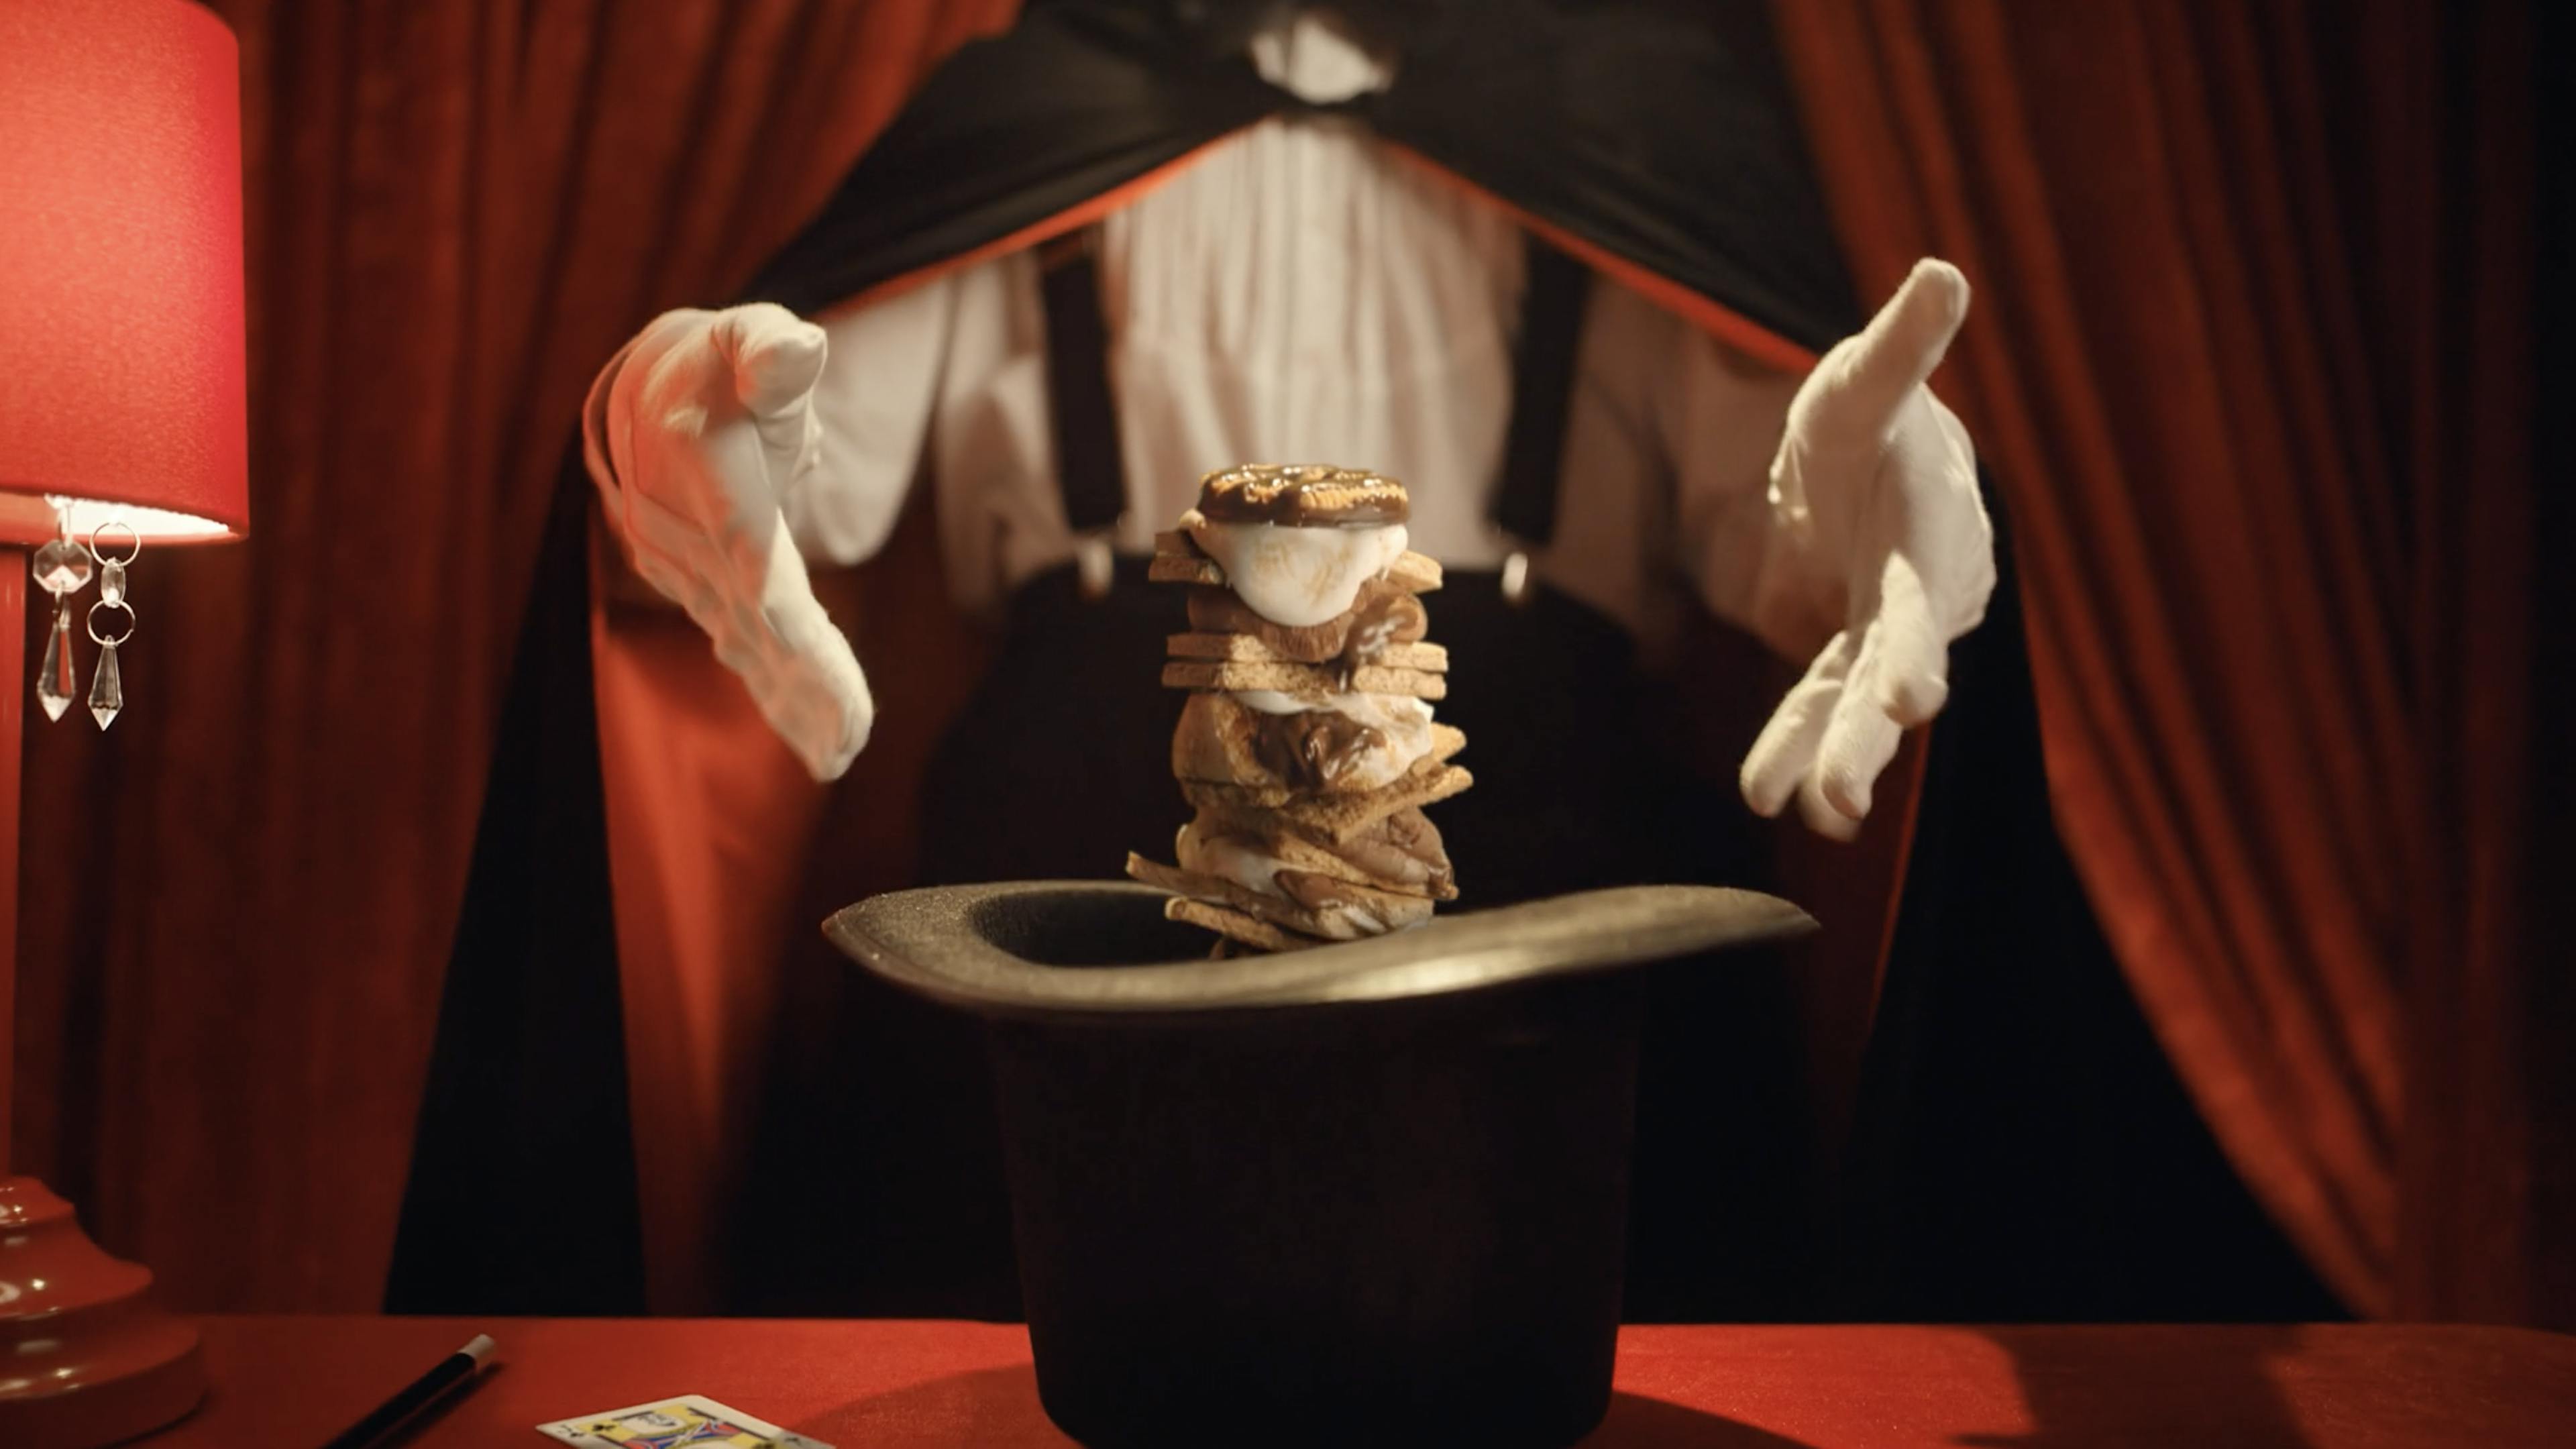 A magician pulls Stuffed Puffed smores out of a hat